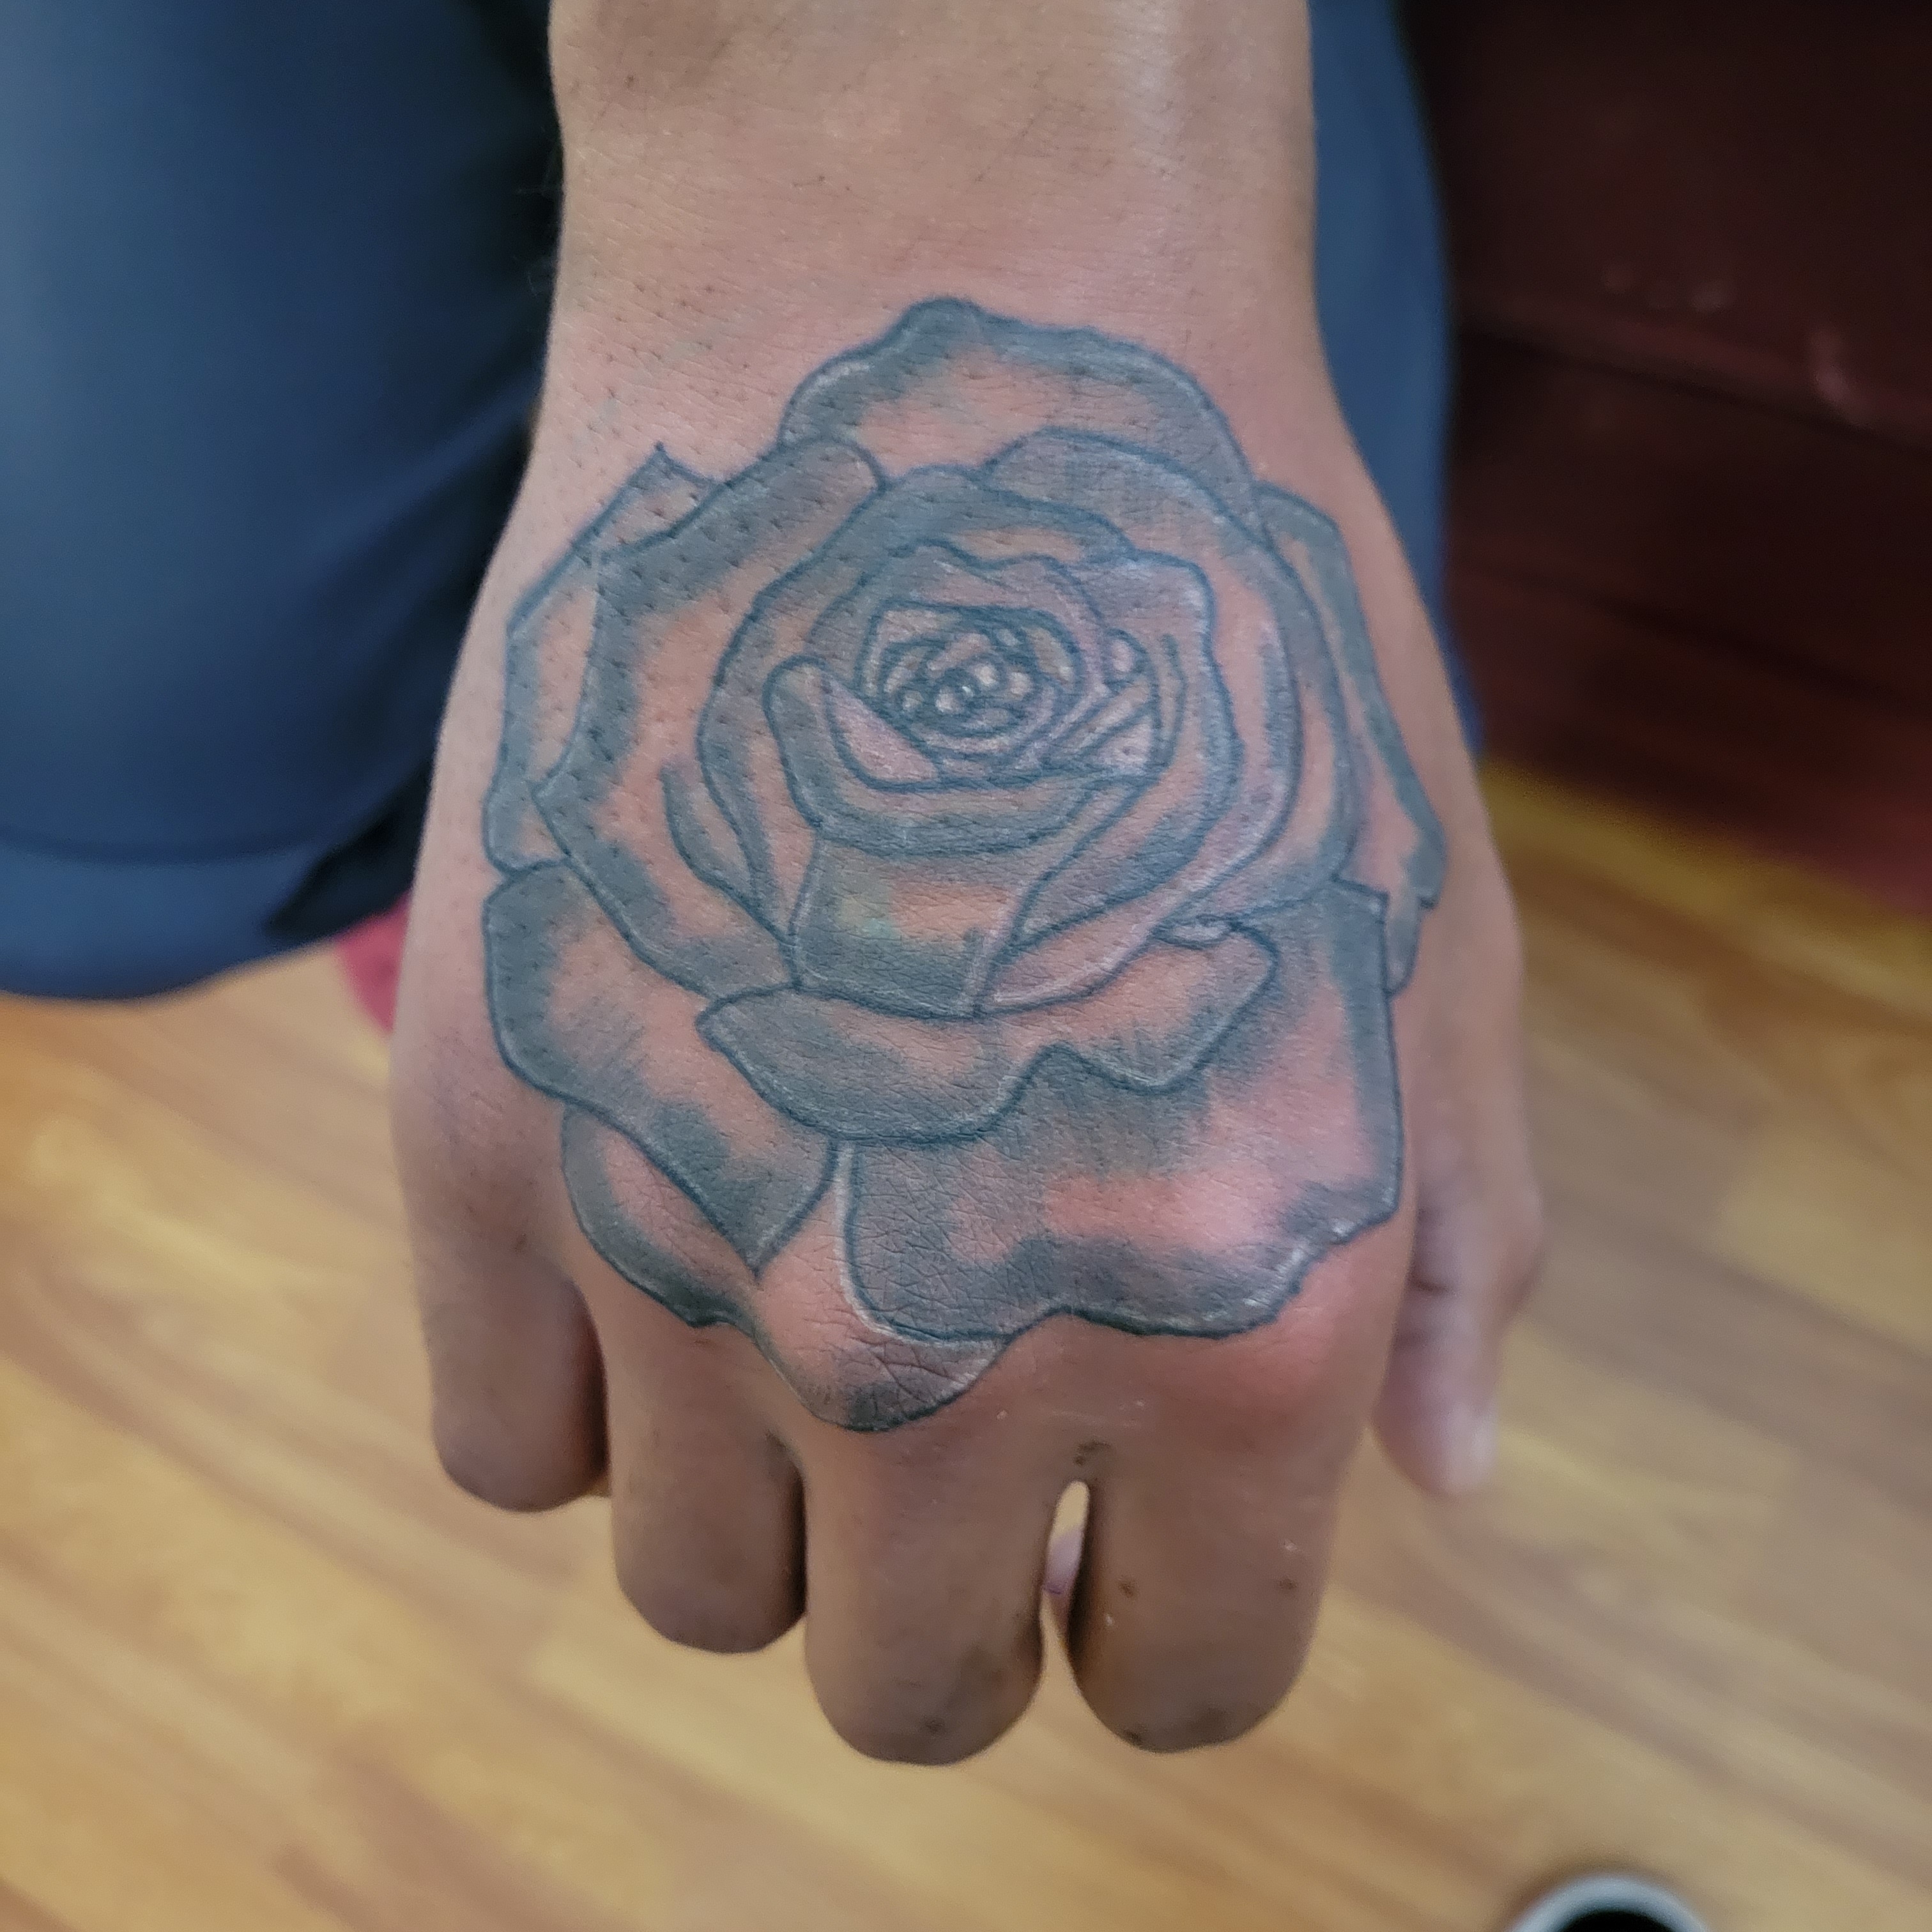 Cesar Giovanny Perez — I did this little tattoo couple days back and...